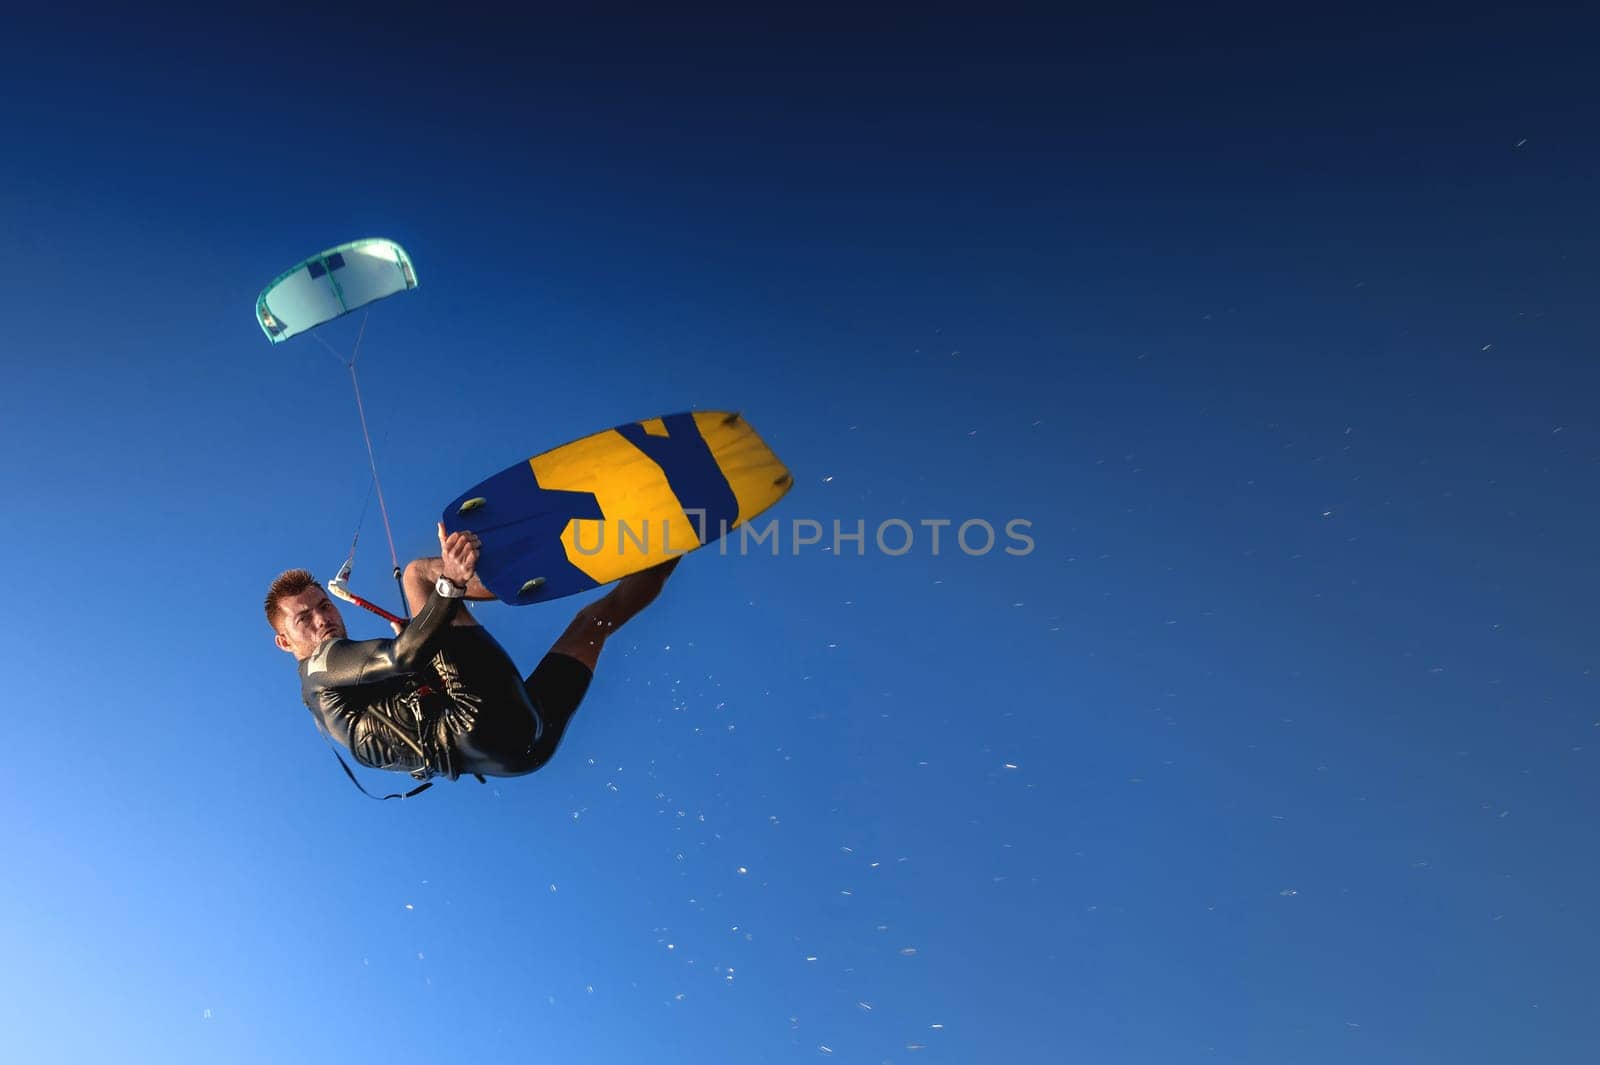 A kitesurfer rides while suspended in the air. Kitesurfer jumps against a beautiful blue sky background catching his board in the air.